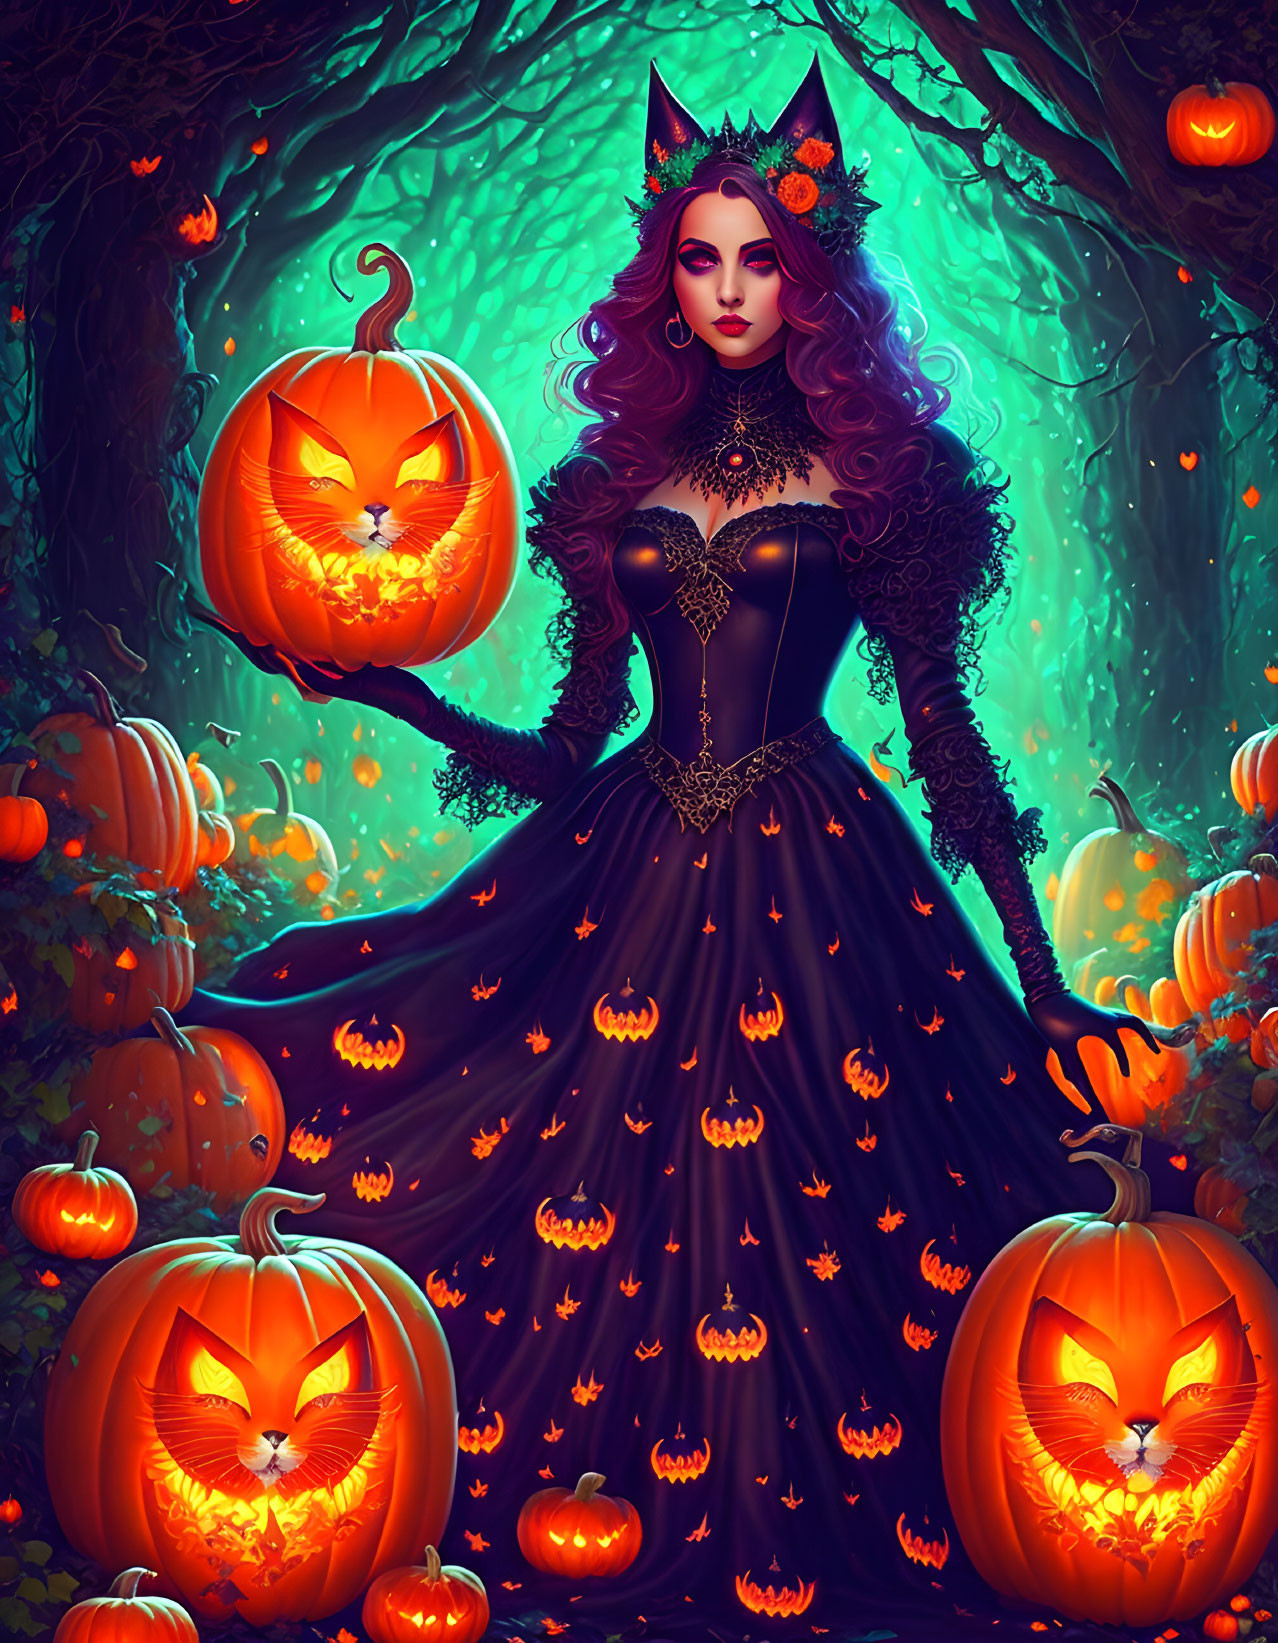 Woman in Halloween Costume Surrounded by Glowing Pumpkins in Magical Forest